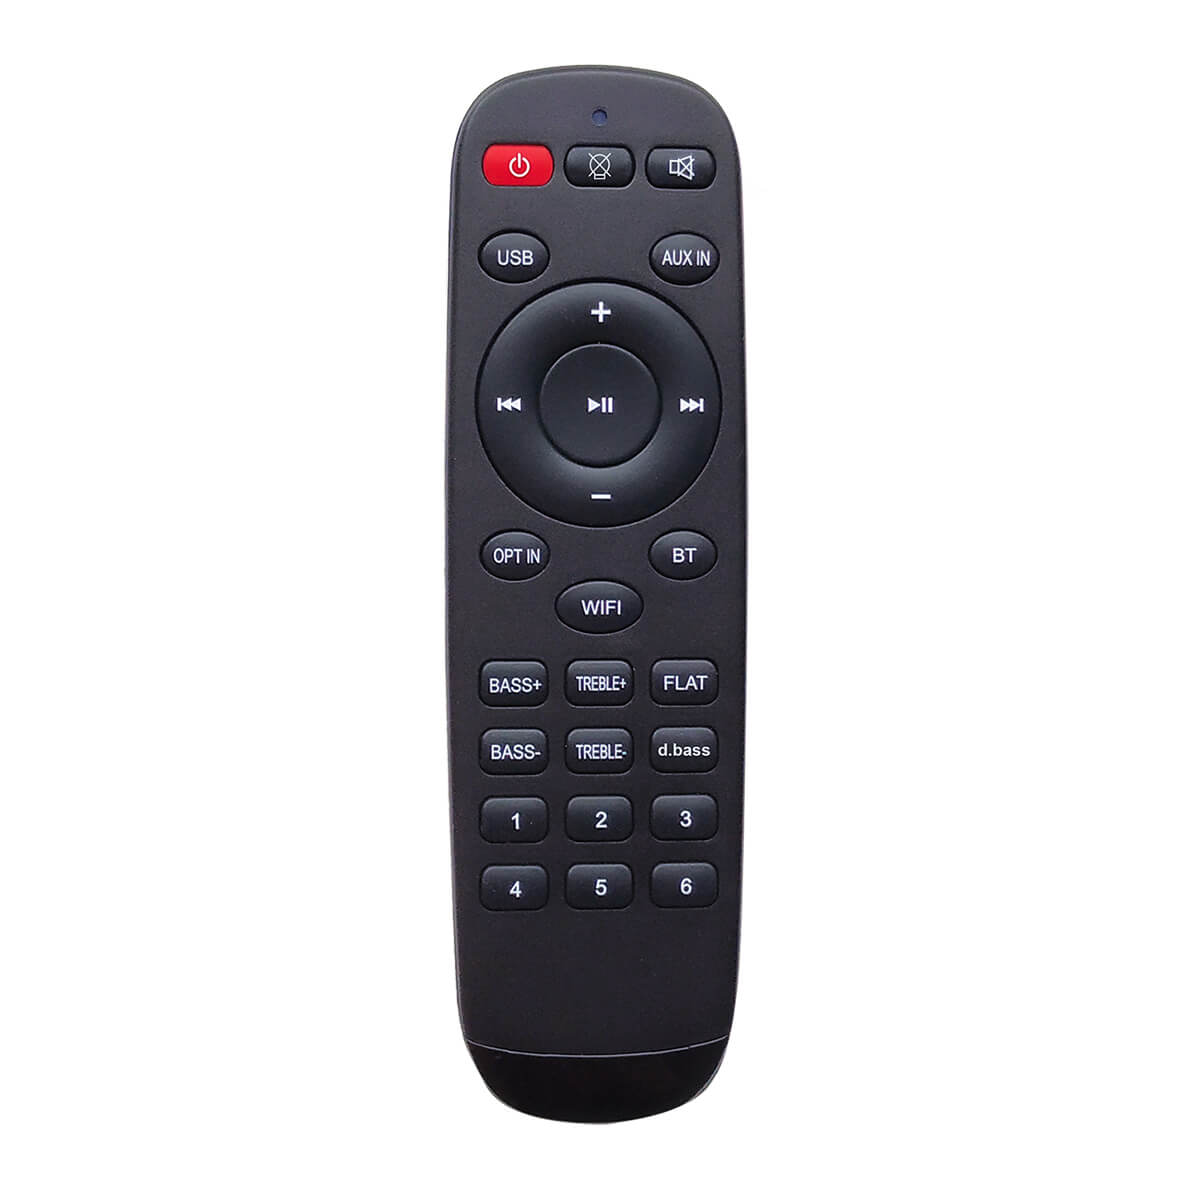 bekennen Oneffenheden Let op IR Remote Control for Amplifier, Speakers Controlling-Arylic.com